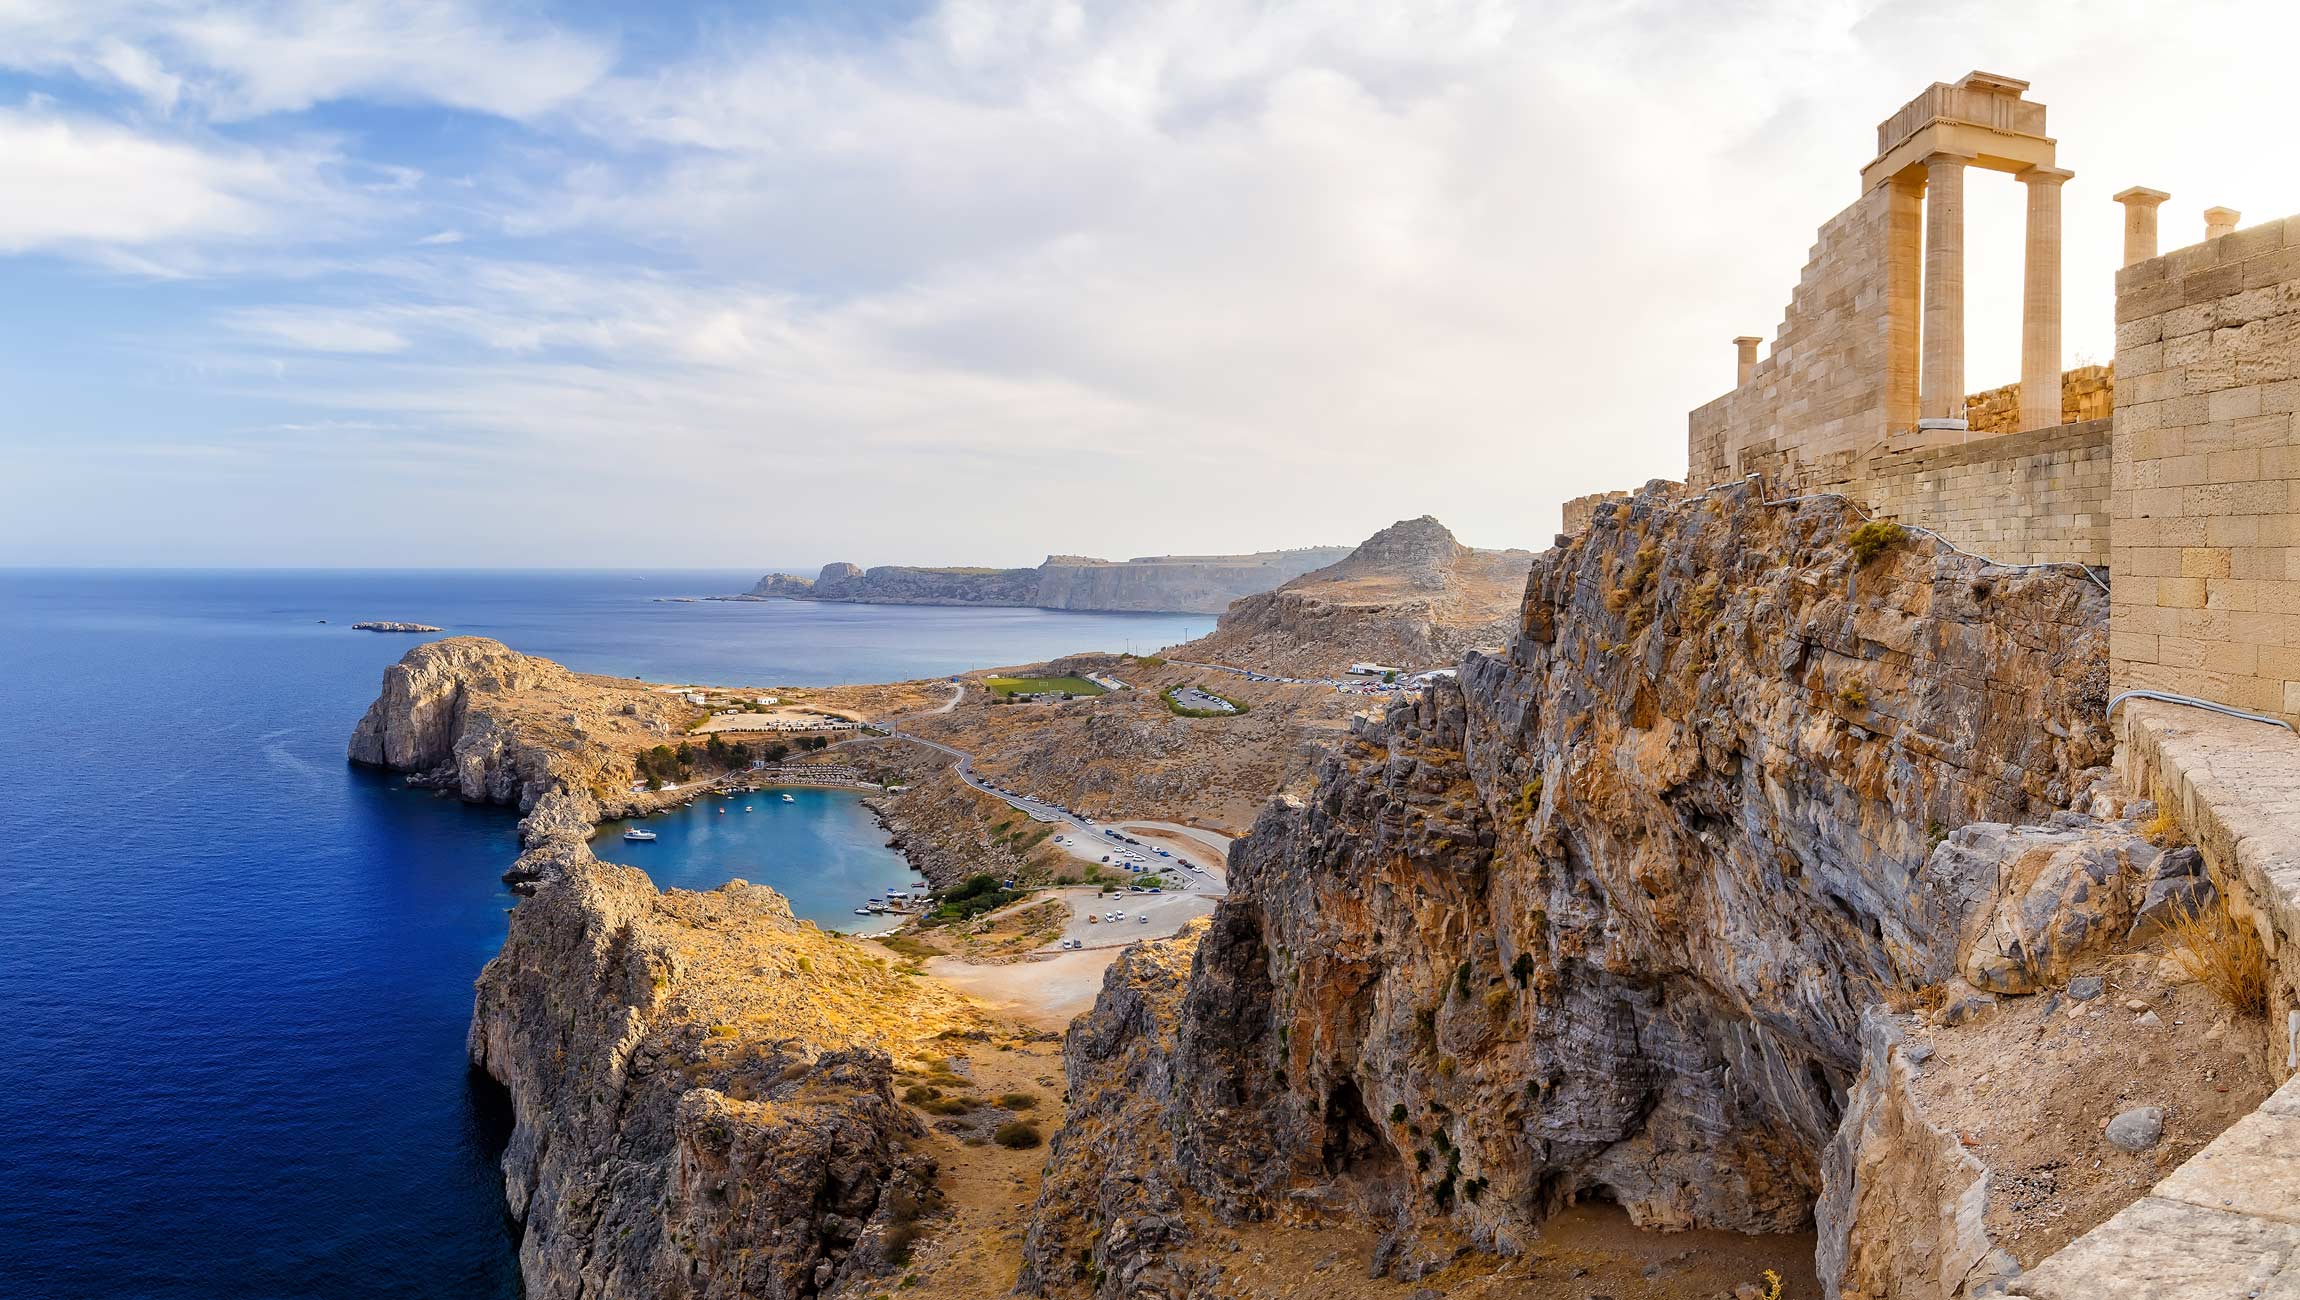 The Ultimate Travel Guide to Greece & its Islands